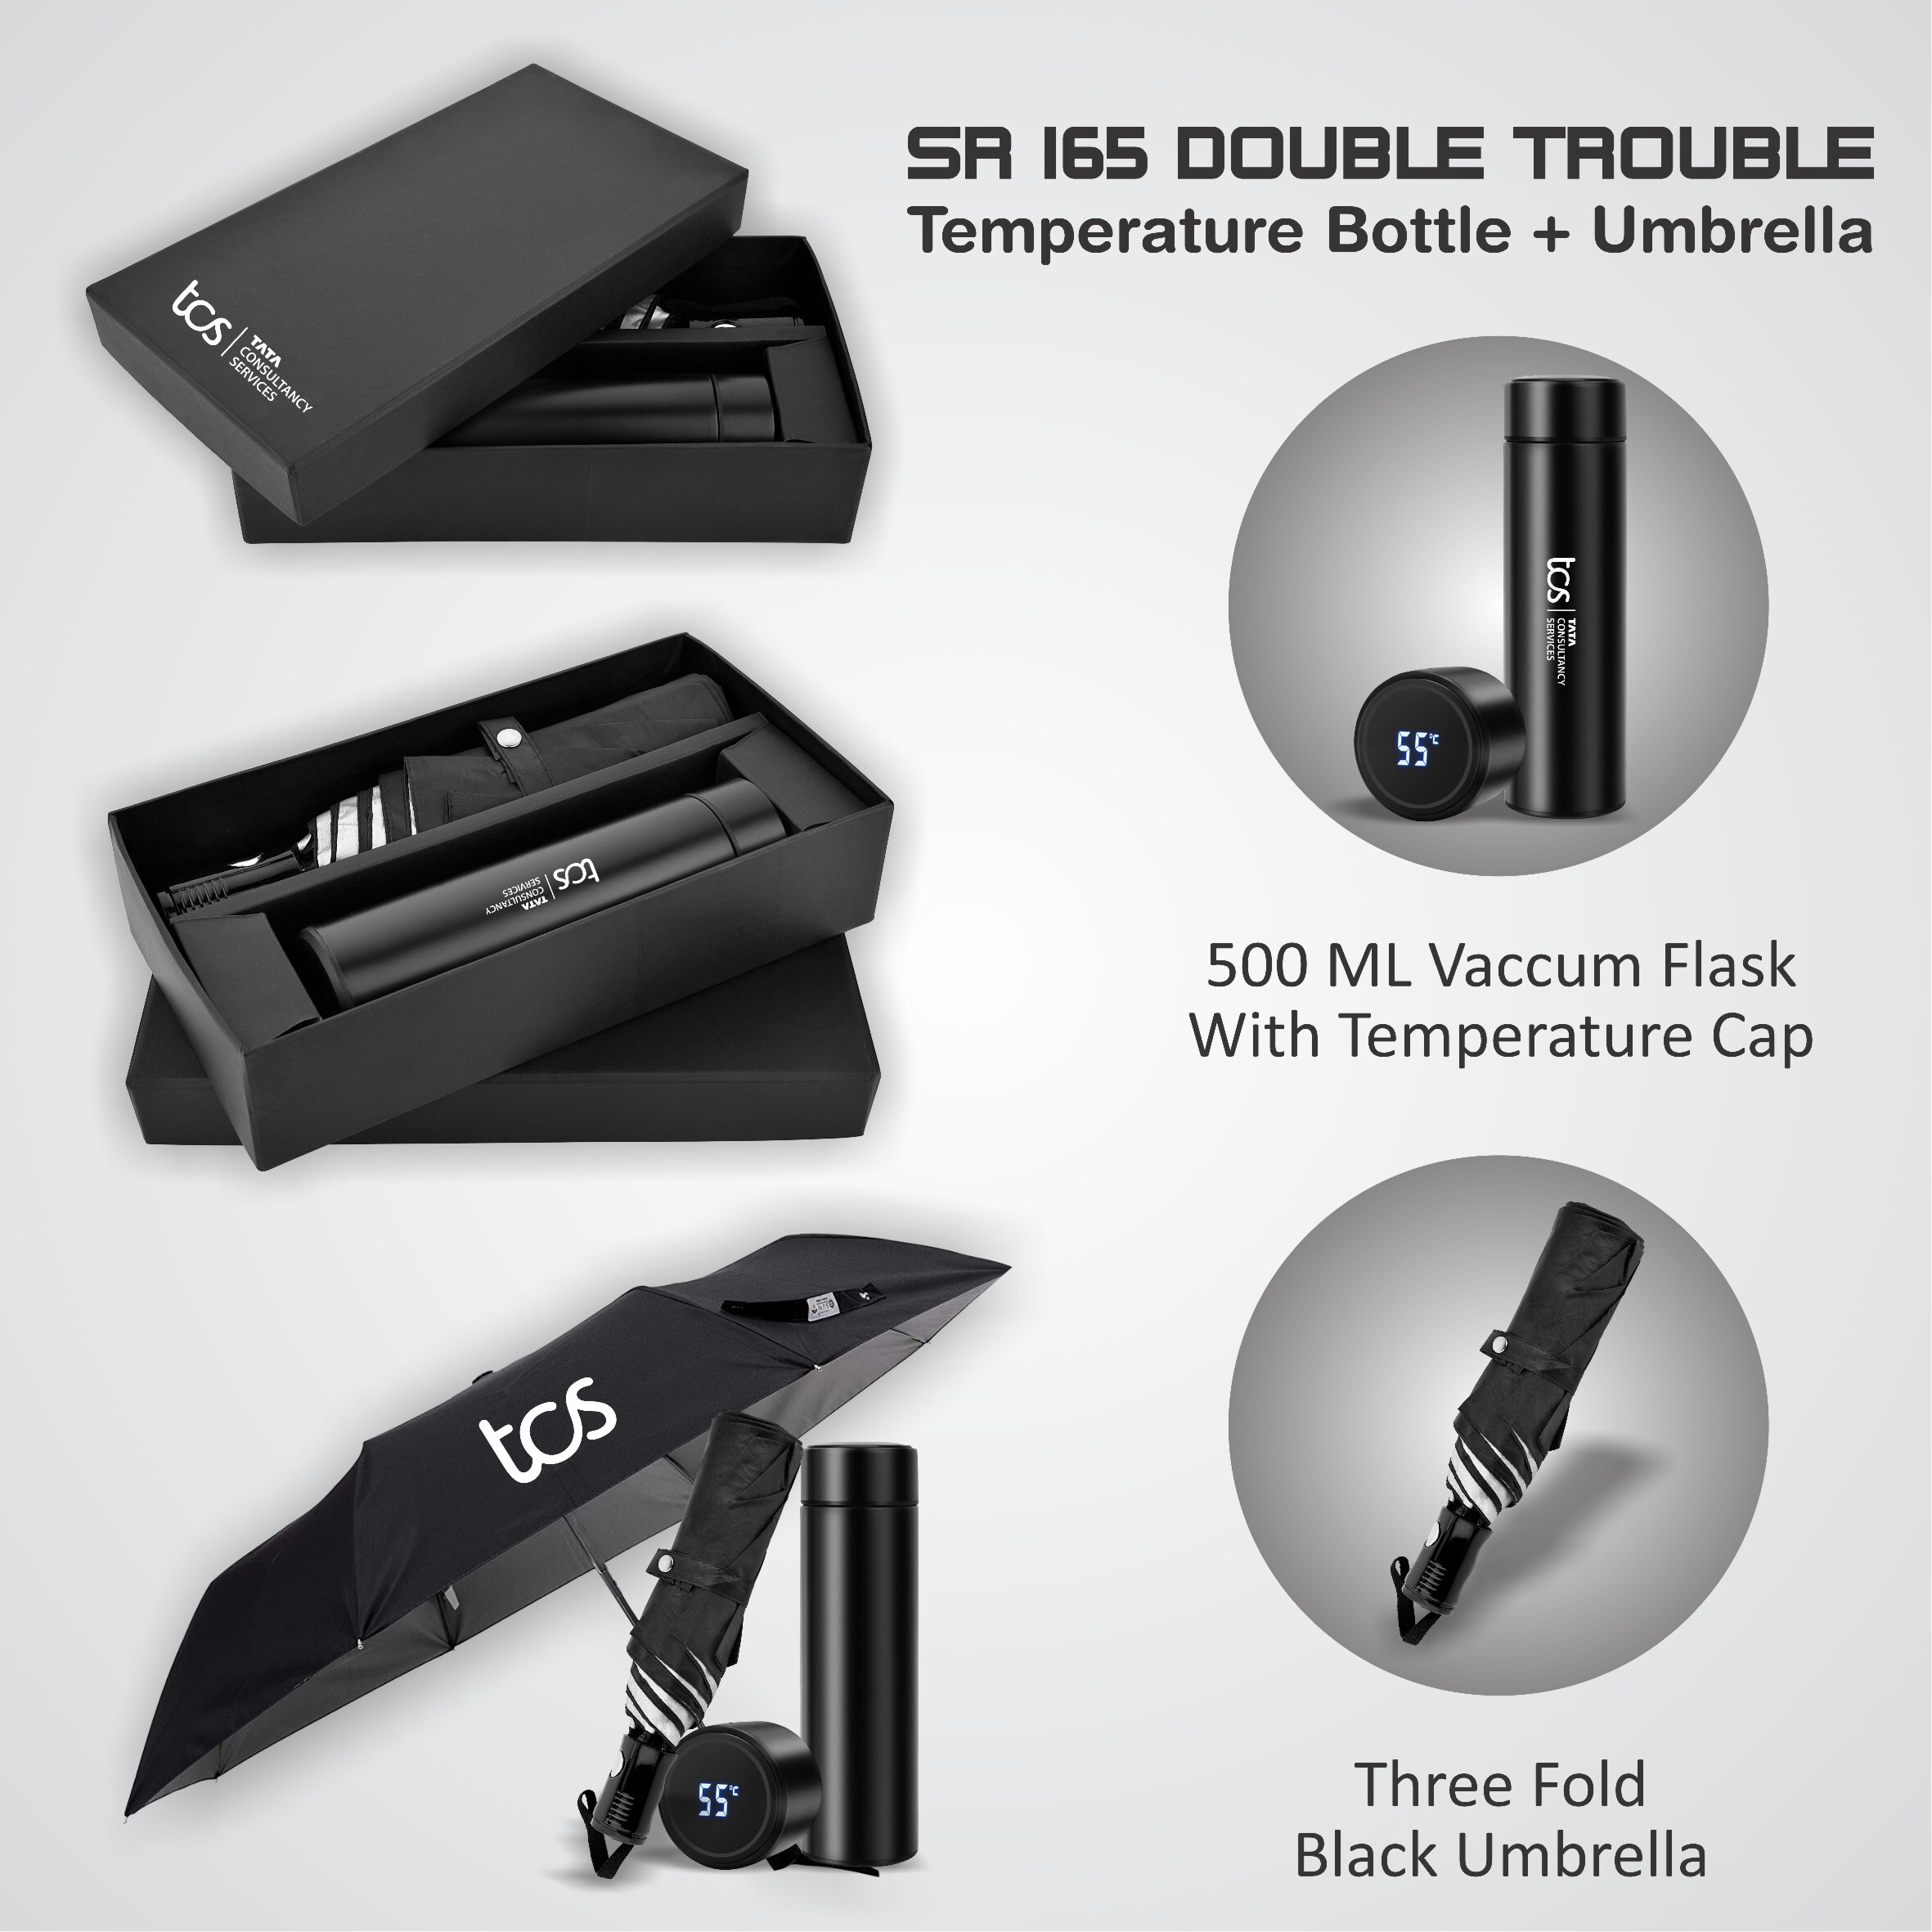 2 in 1 Umbrella And Temperature Bottle Combo Set Sr 165 Double Trouble